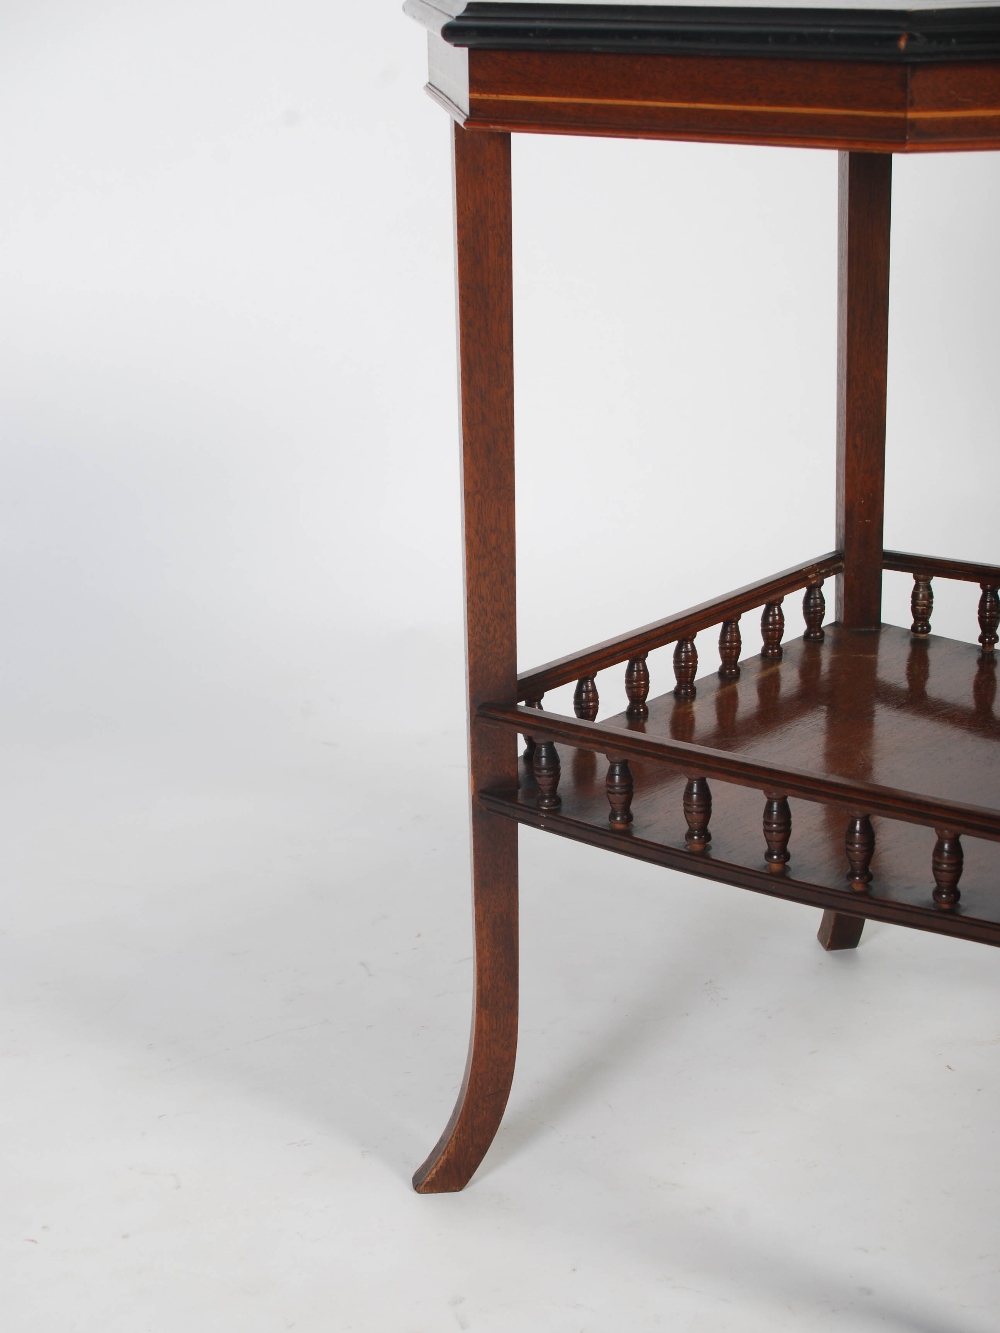 A 19th century octagonal shaped rosewood, walnut and specimen wood inlaid games table in the - Image 3 of 5